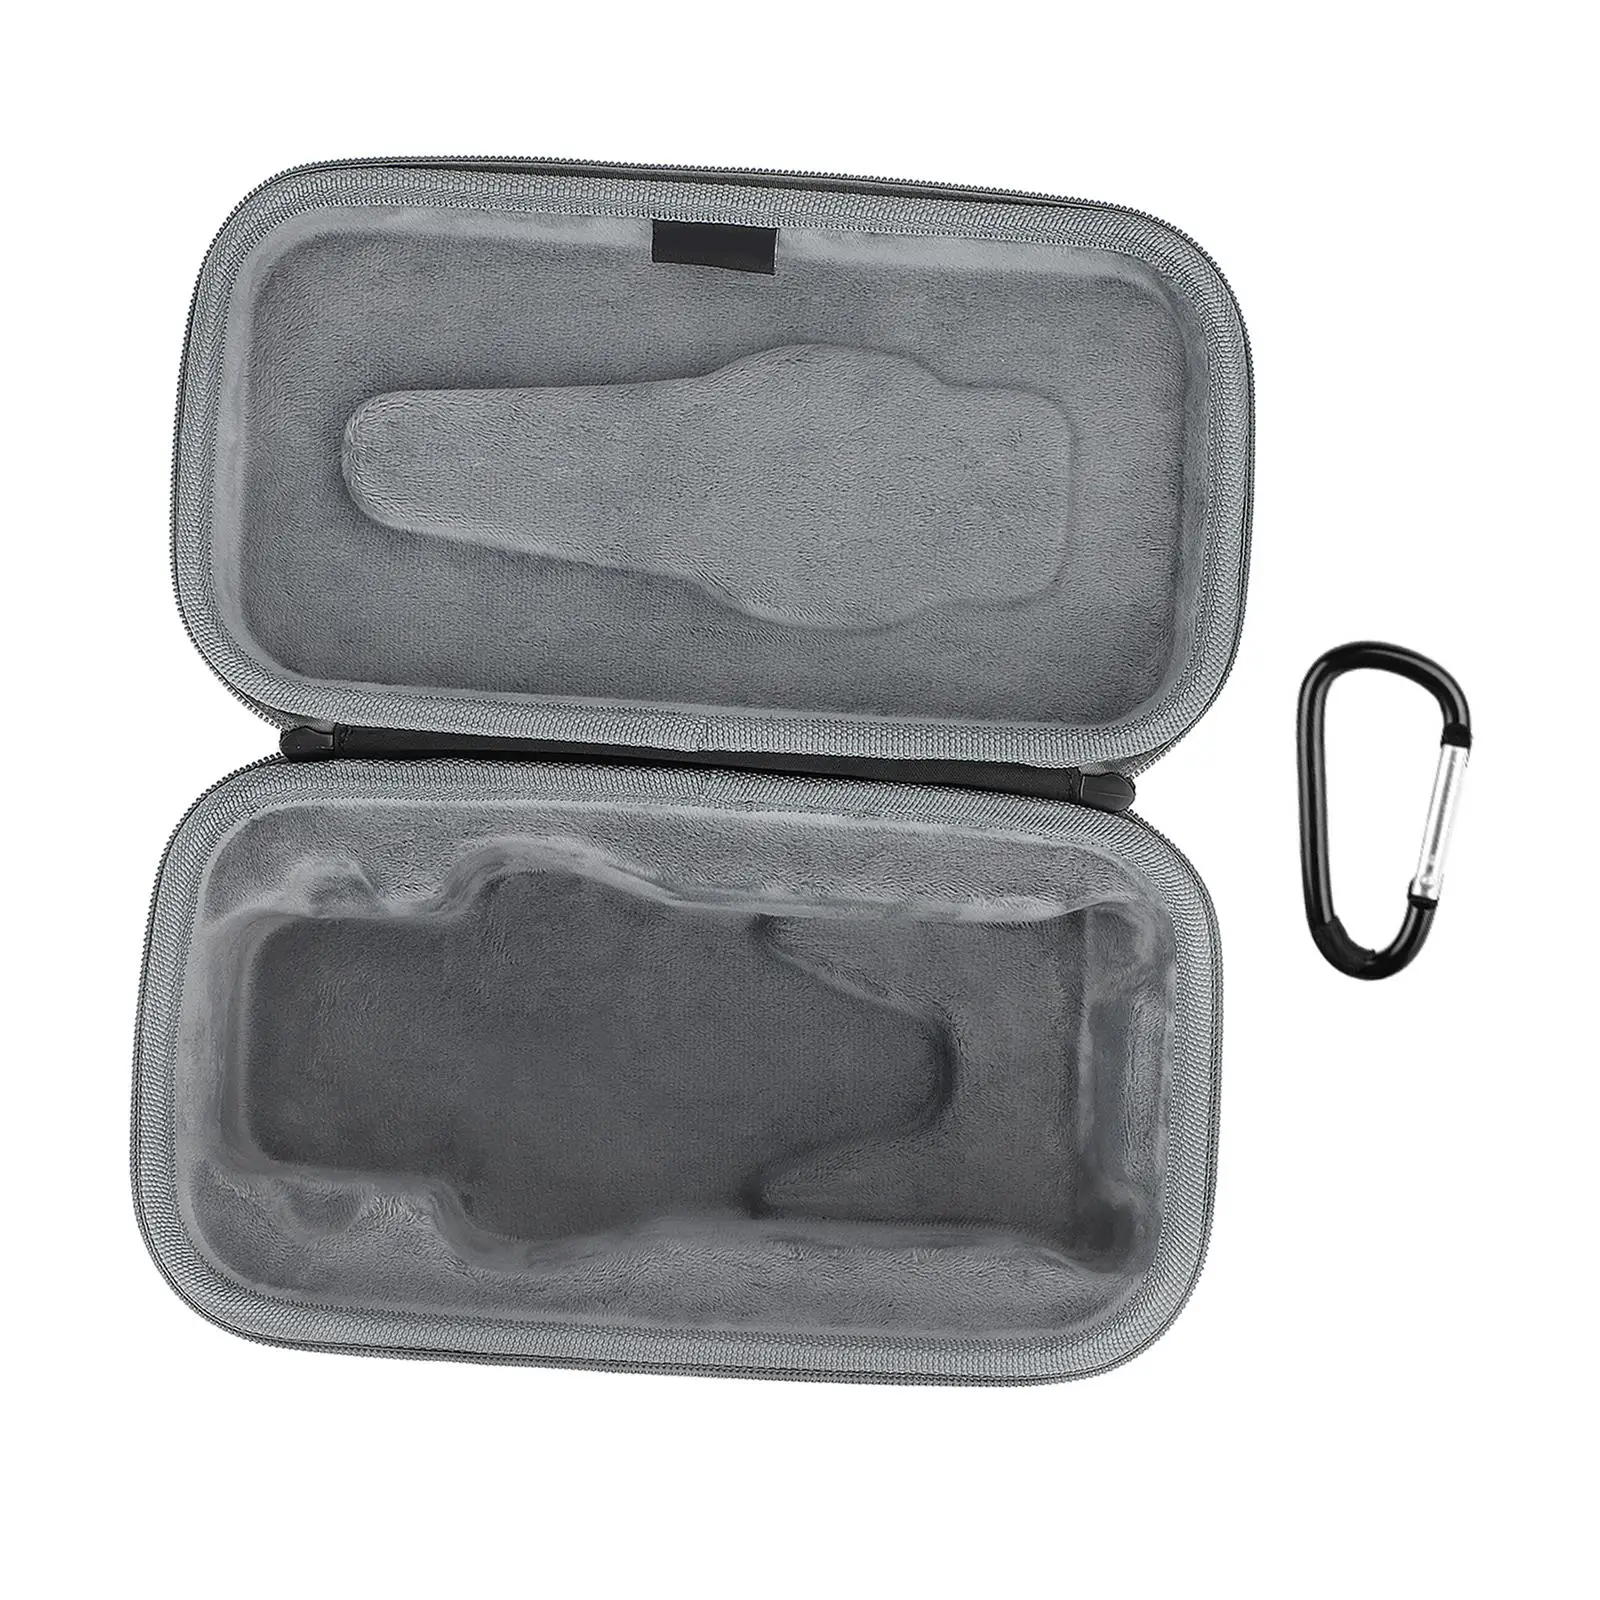 Hard Carrying Case with Carabiner Hard Case Drone Accessories for Mavic 3 Pro Helicopter Remote Controller Quadcopter Mavic 3